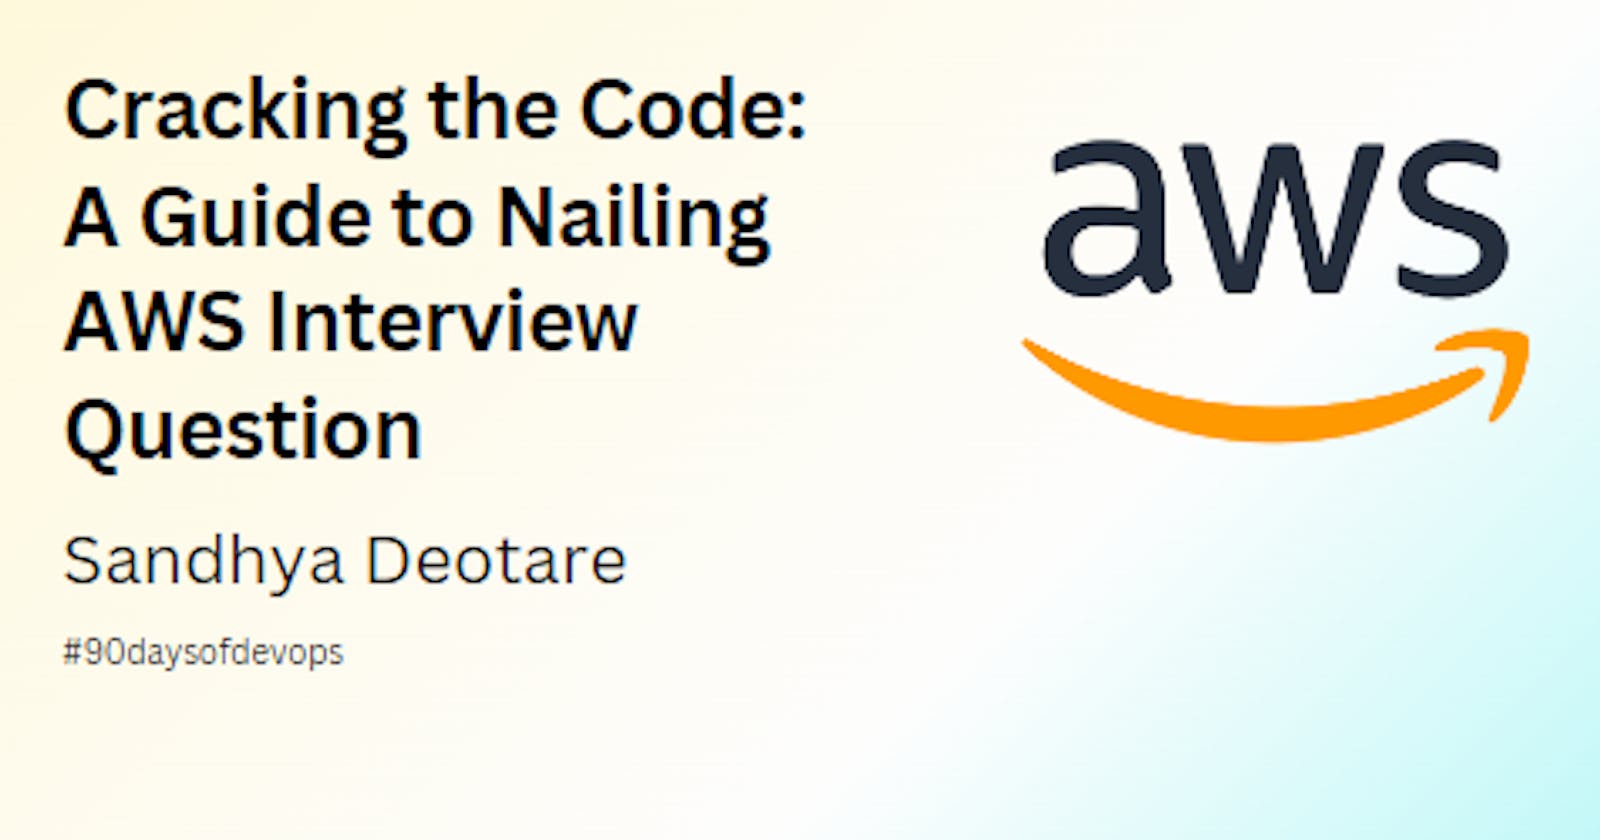 Cracking the Code: A Guide to Nailing AWS Interview Questions